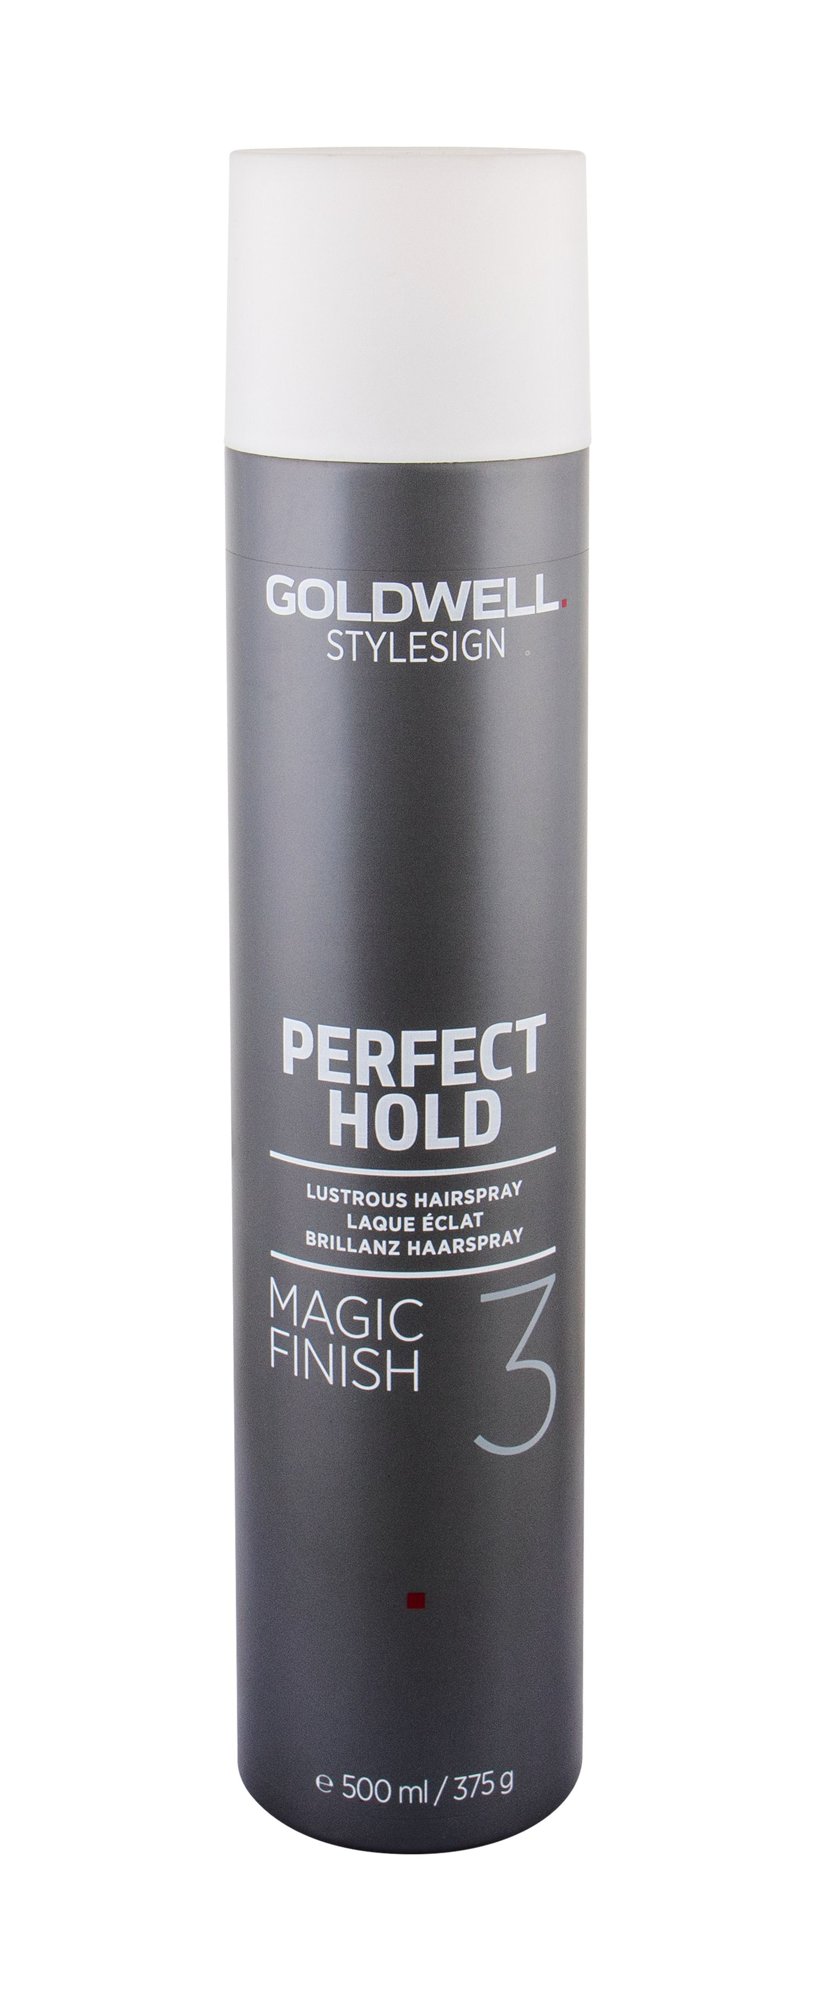 Goldwell Style Sign Perfect Hold 500ml plaukų lakas